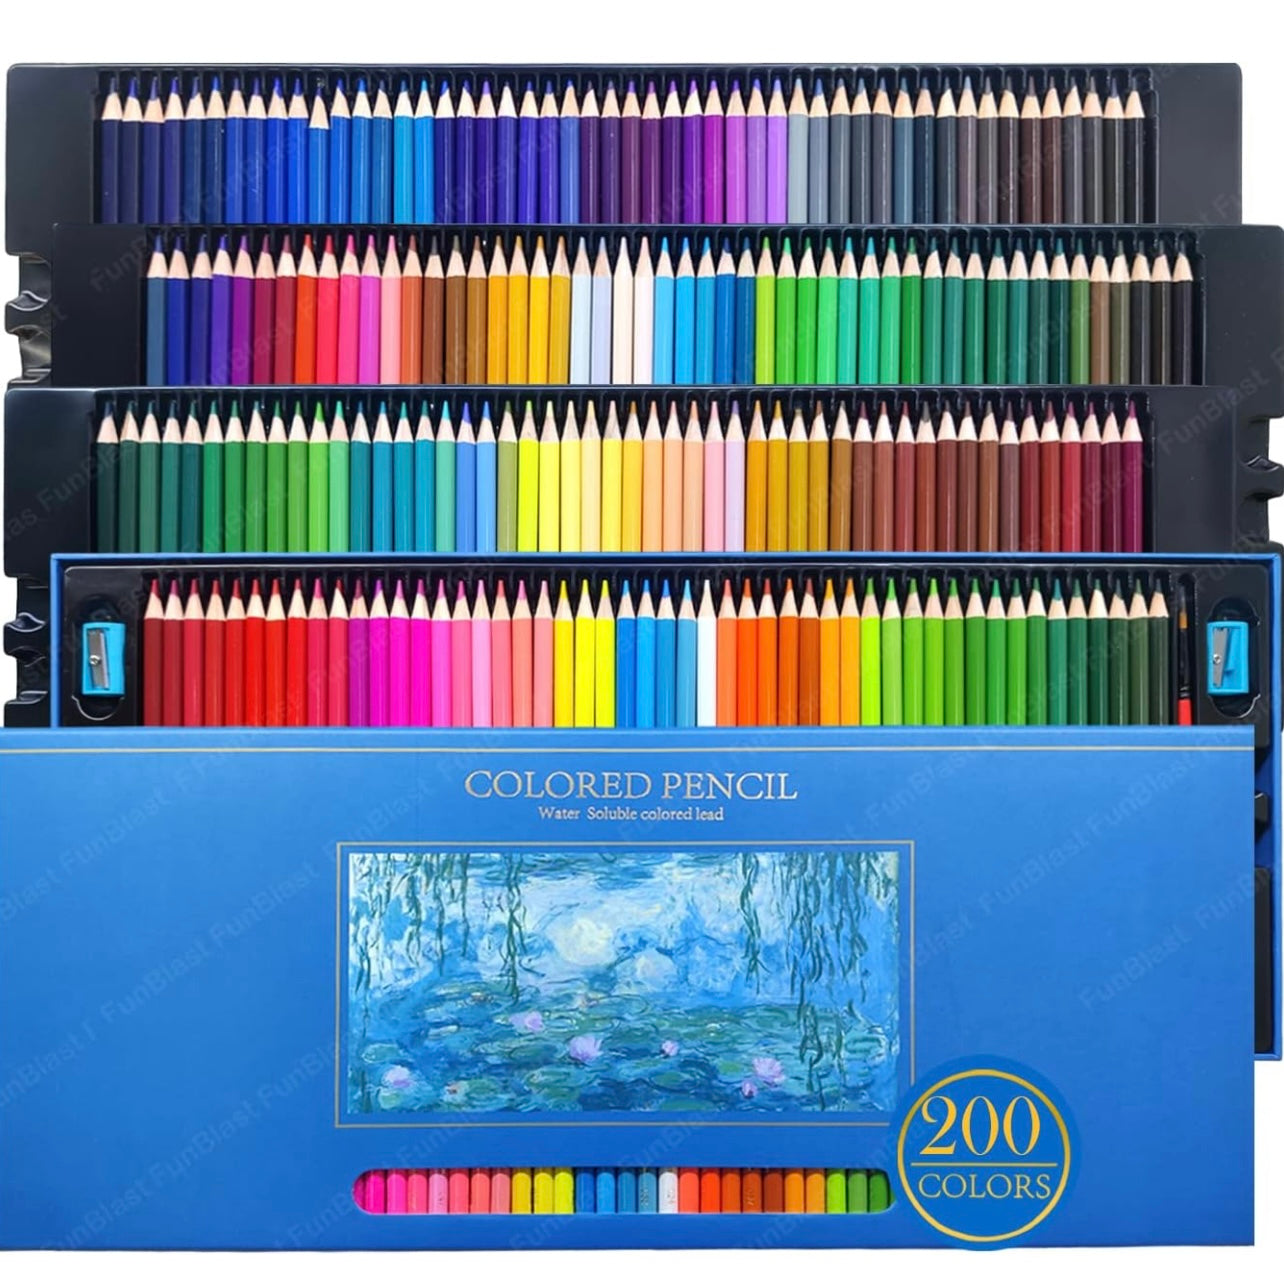 Artistic Dreams - 200 Different Colours to Express Yourself !!